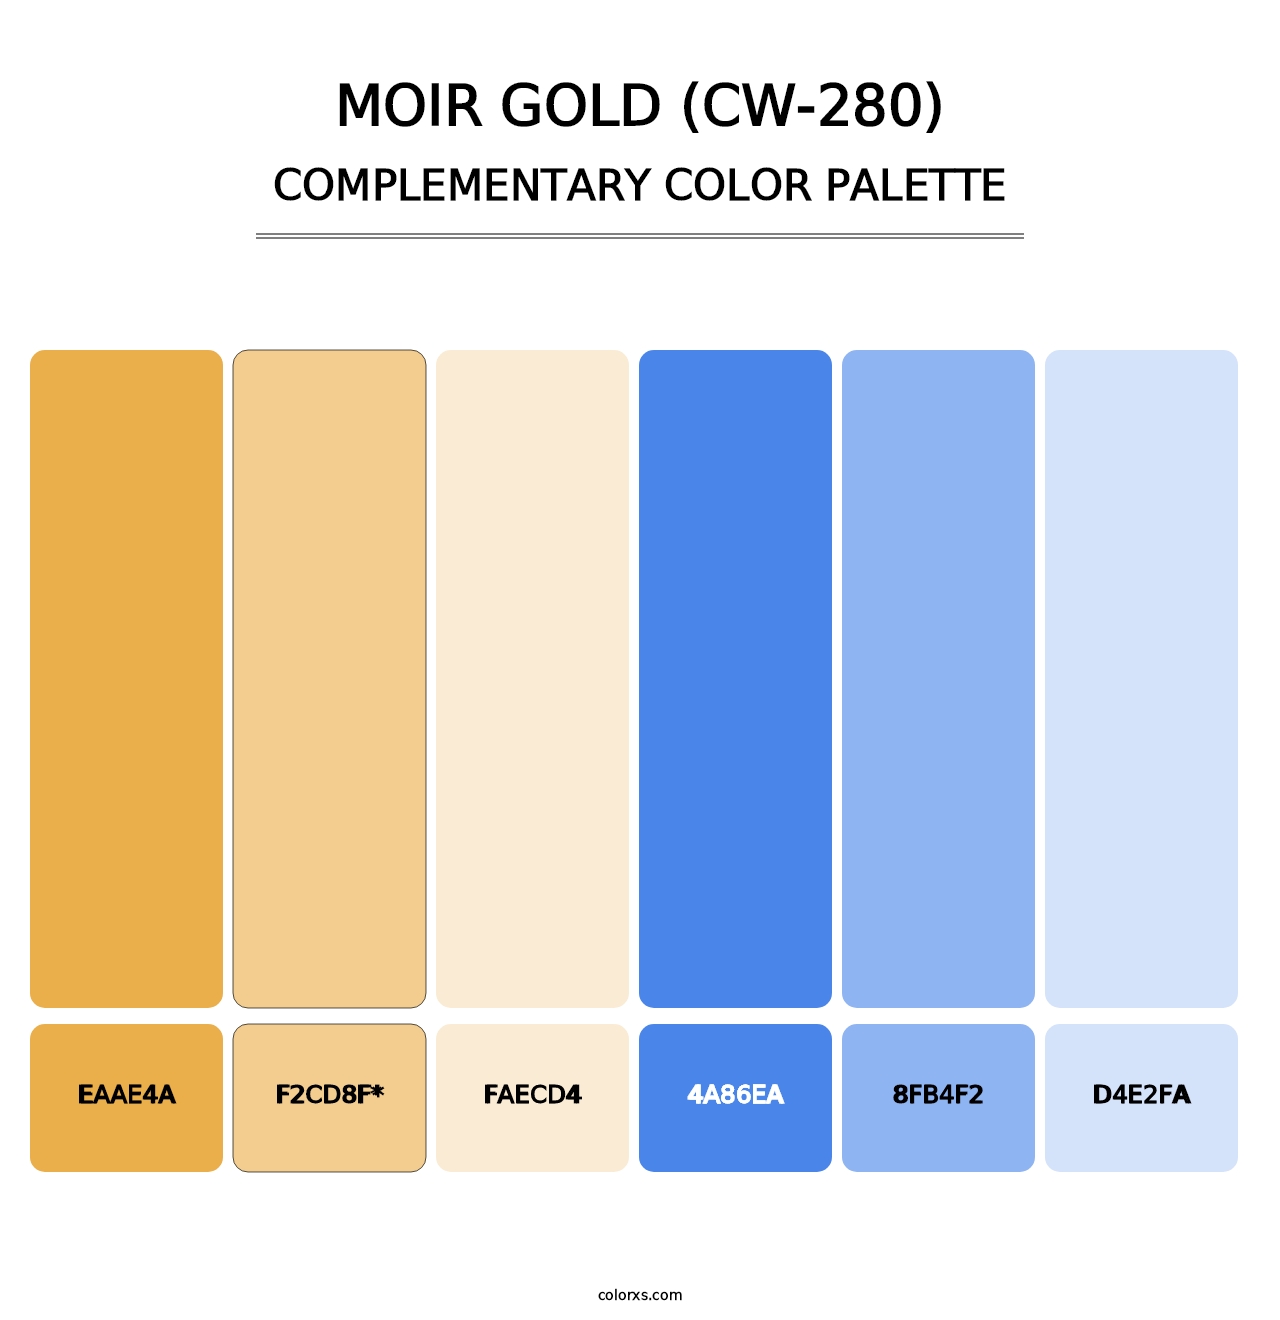 Moir Gold (CW-280) - Complementary Color Palette